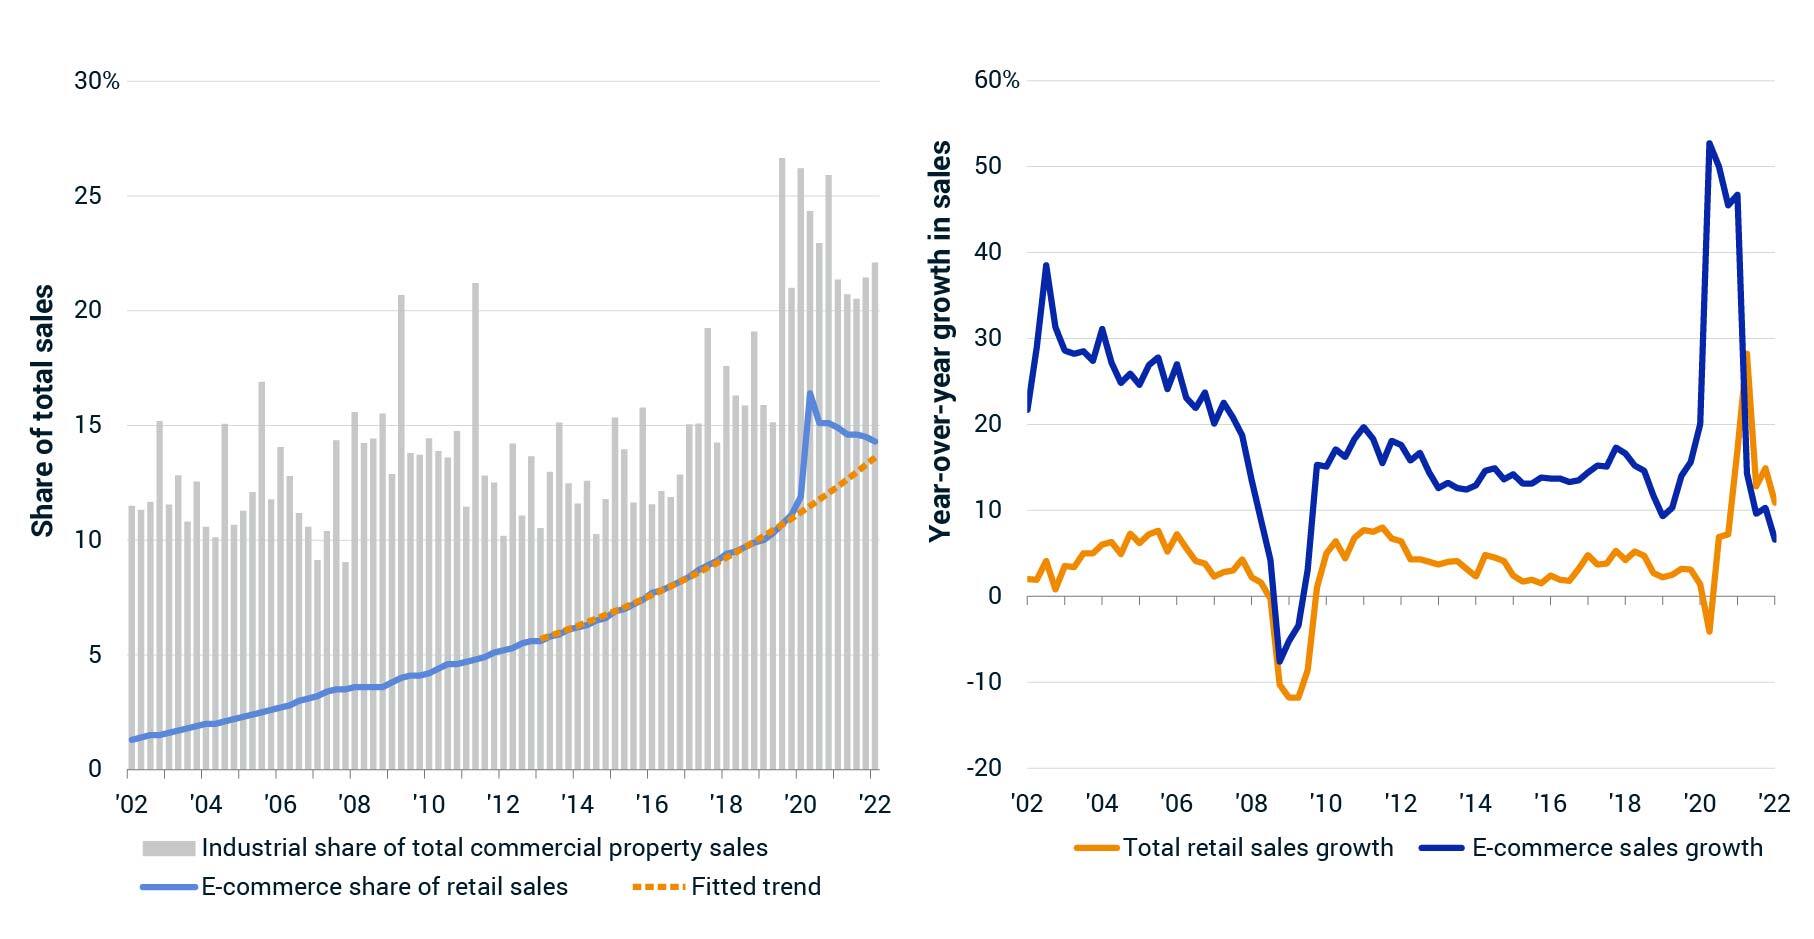 This graphic displays two charts. The first chart shows U.S. industrial commercial property investment volume as a share of total U.S. property investment volume, and U.S. e-commerce retail sales as a share of total U.S. retail sales, including a fitted trend to continue the 2013-2019 e-commerce trend. The second chart shows year-over-year growth in total U.S. retail sales and in e-commerce sales